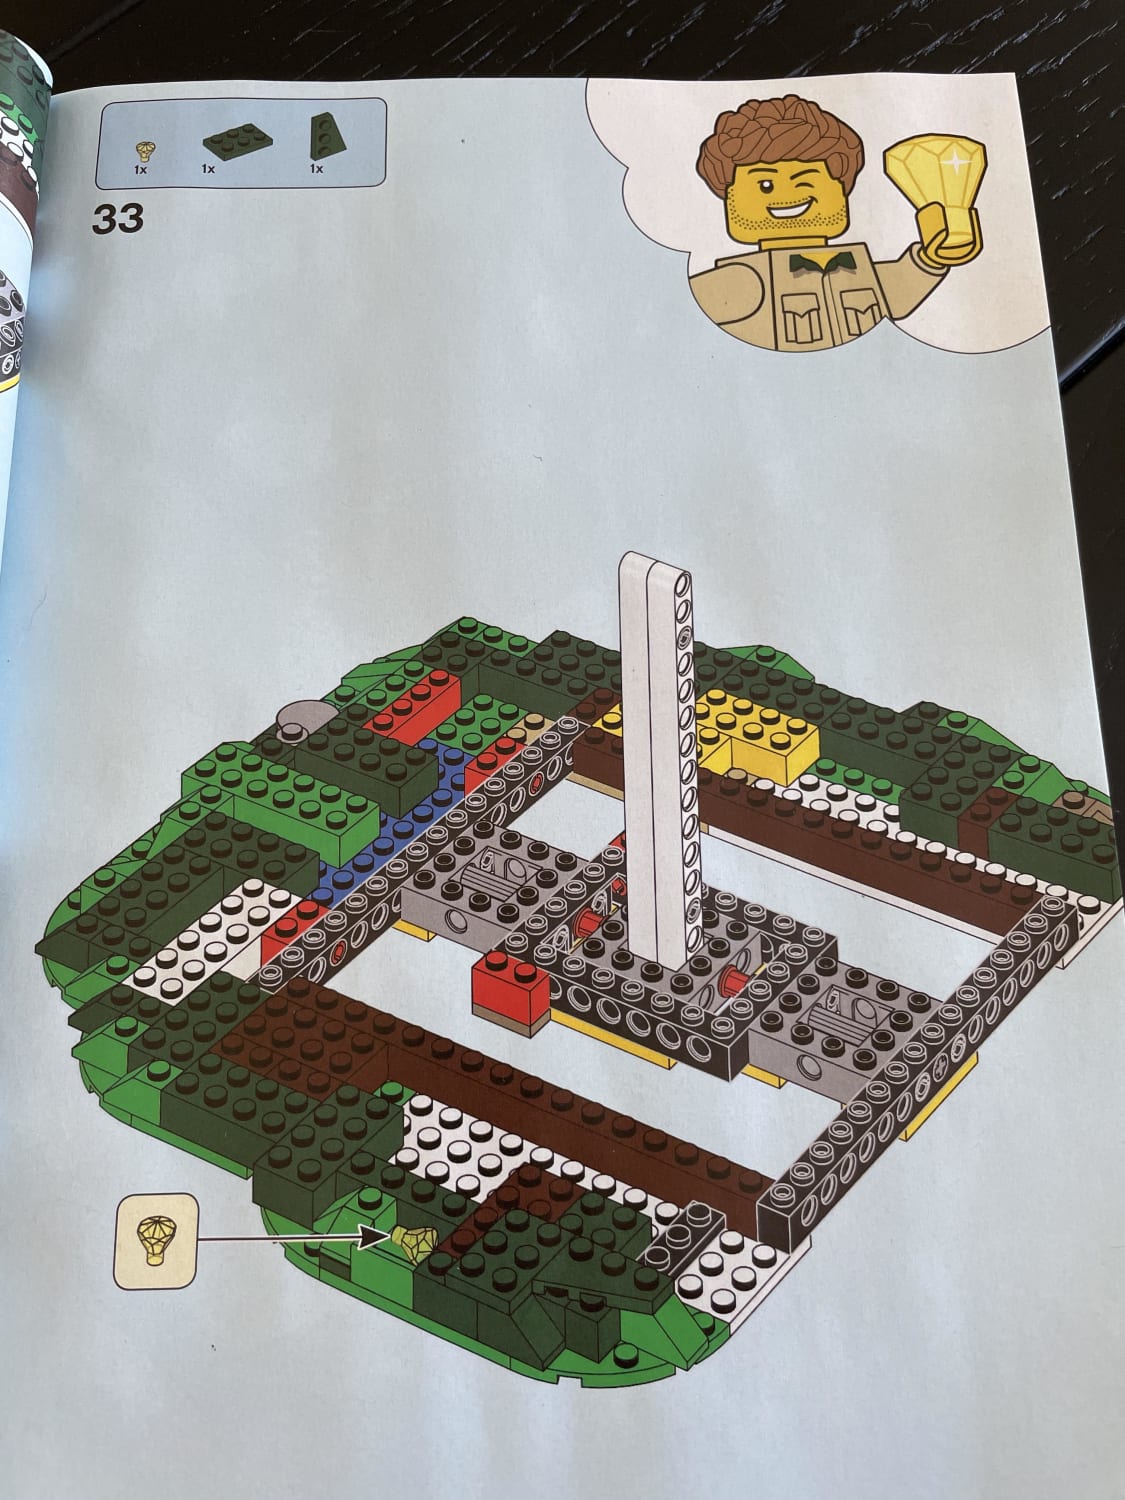 Treehouse: what does the top right image mean? Is it just to show that minifigure can hold that thing?